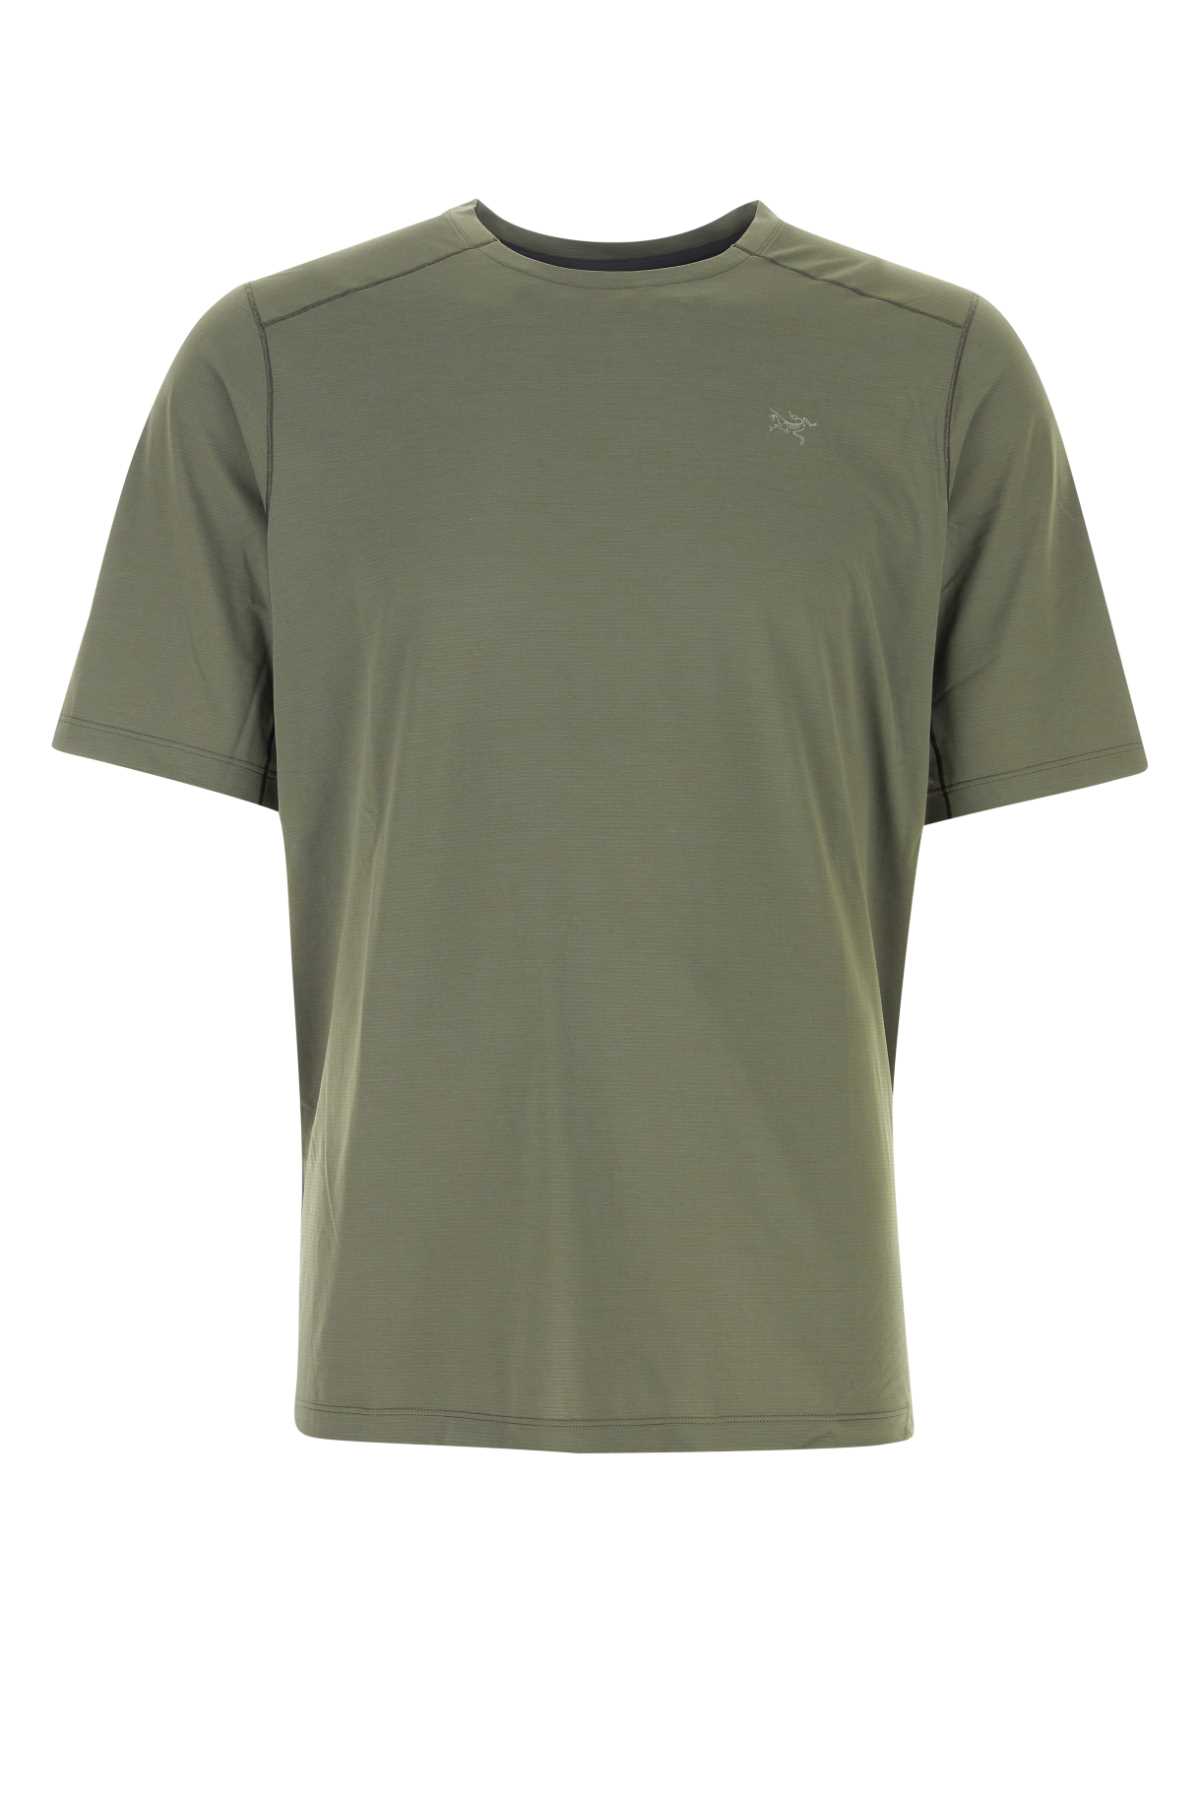 Arc'teryx Army Green Polyester T-shirt In Forageheather